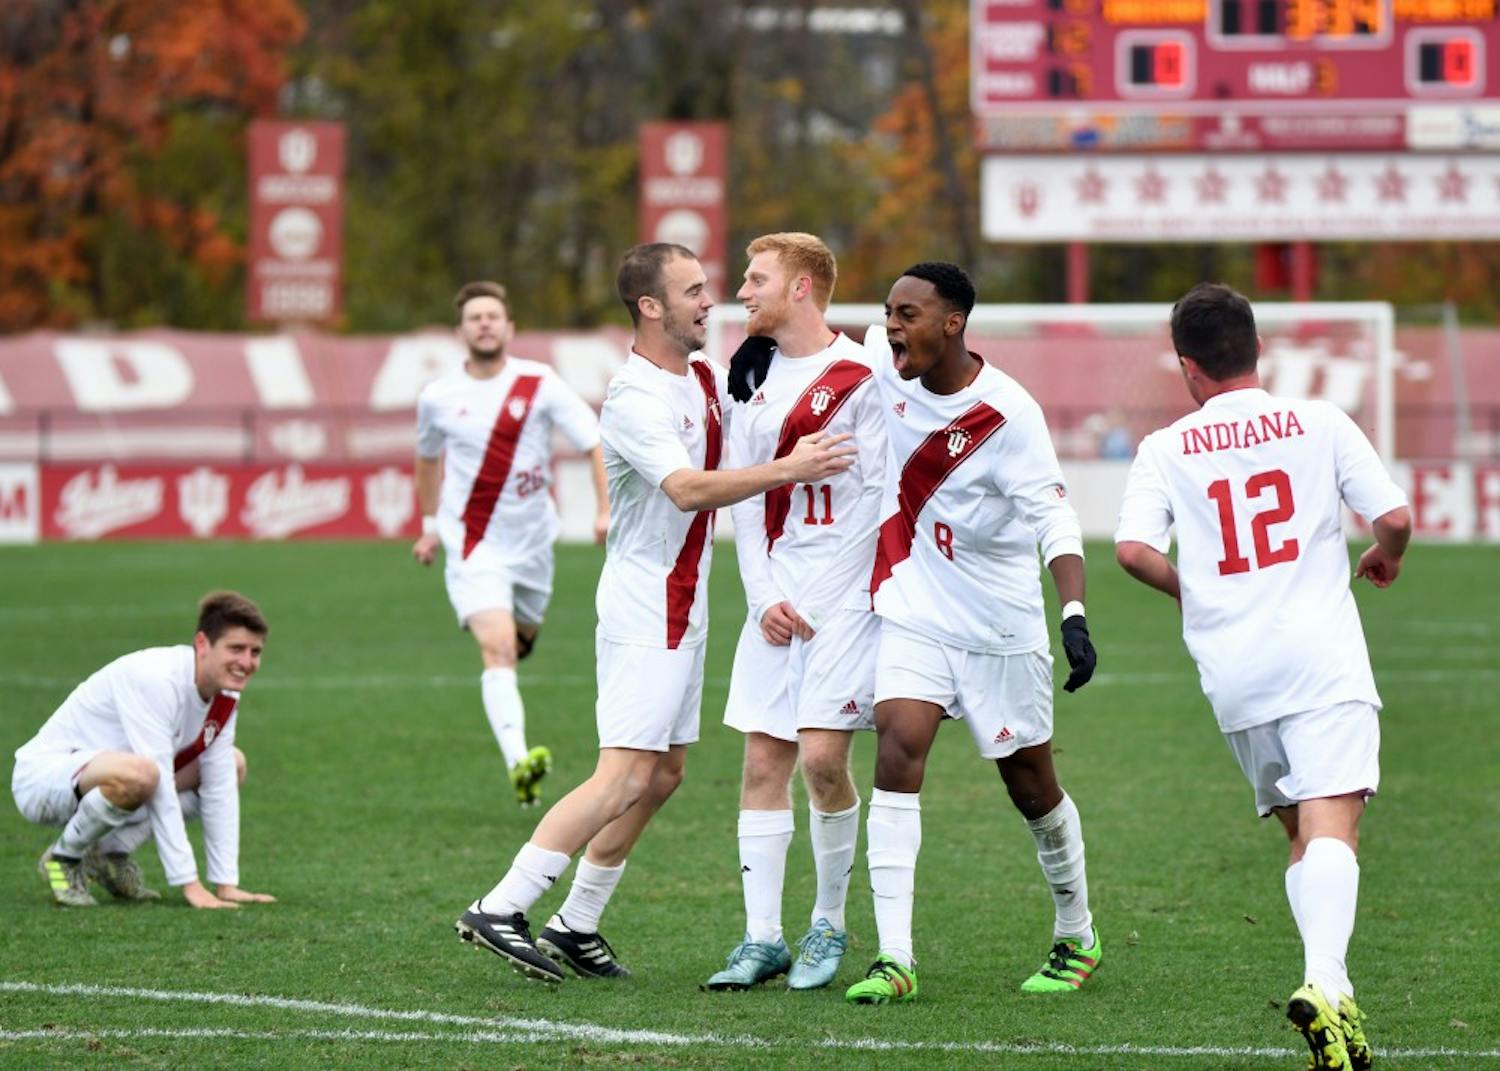 IU celebrates after then-junior midfielder Cory Thomas scored the game-winning goal against Penn State on Nov. 6 at Bill Armstrong Stadium. IU played No. 4 Akron to a draw in their final exhibition match of 2018.